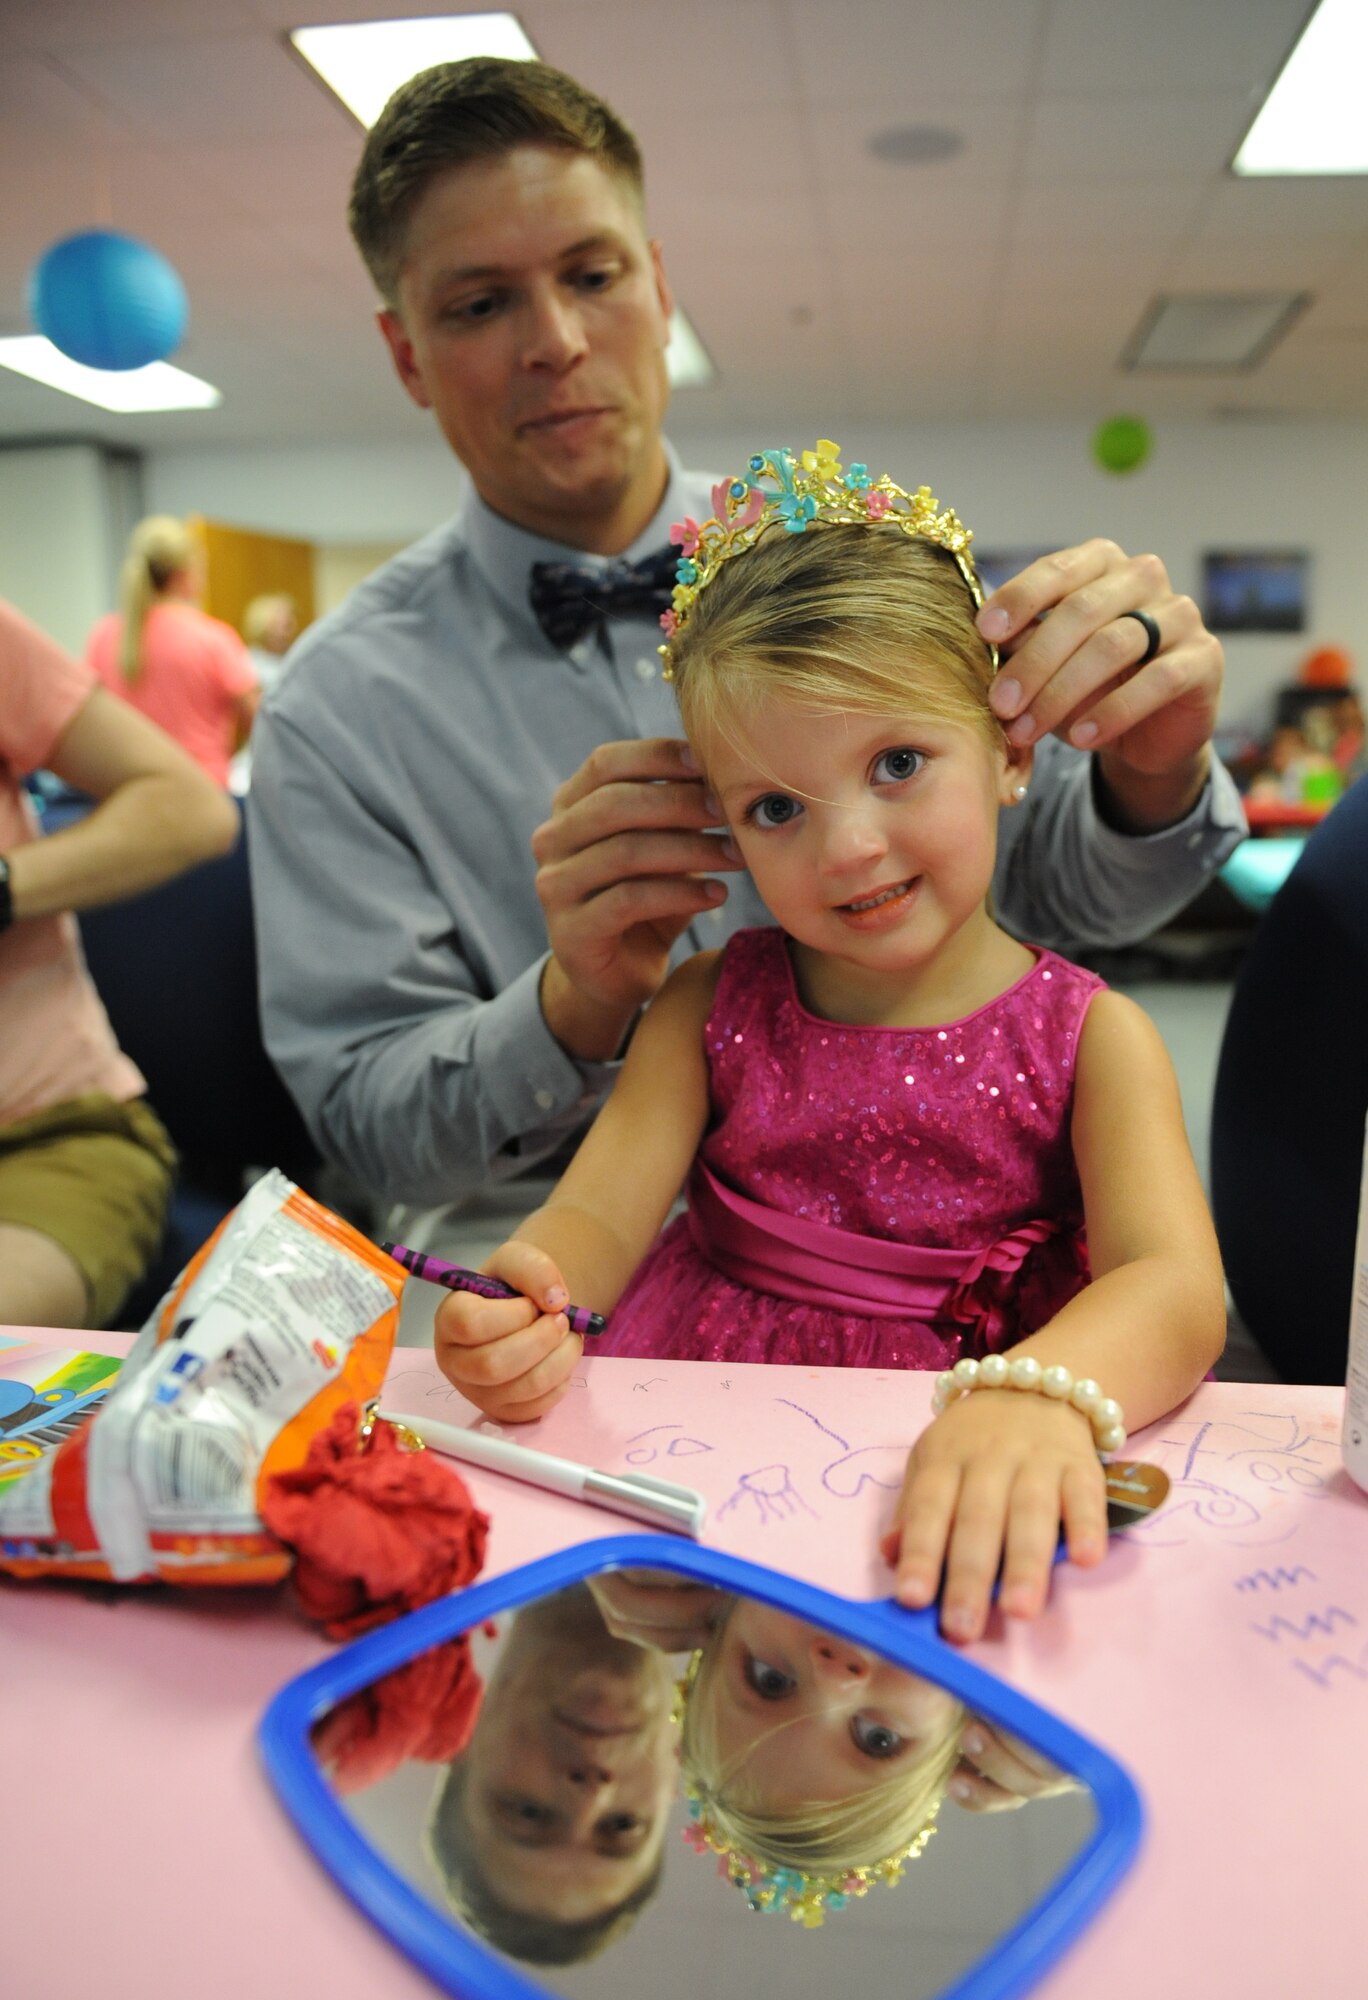 Second Lt. David Giannotti, 81st Logistics Readiness Squadron distribution officer in charge, places a tiara on his daughter, Paisley during a Daddy/Daughter Dinner and a “Do” event at the Sablich Center June 24, 2016 on Keesler Air Force Base, Miss. The event included dinner and hands-on hair styling techniques for the dads, which provided a valuable opportunity for sharing, learning new practical skills and deepening the bond between the dads and their daughters. (U.S. Air Force photo by Kemberly Groue/Released)